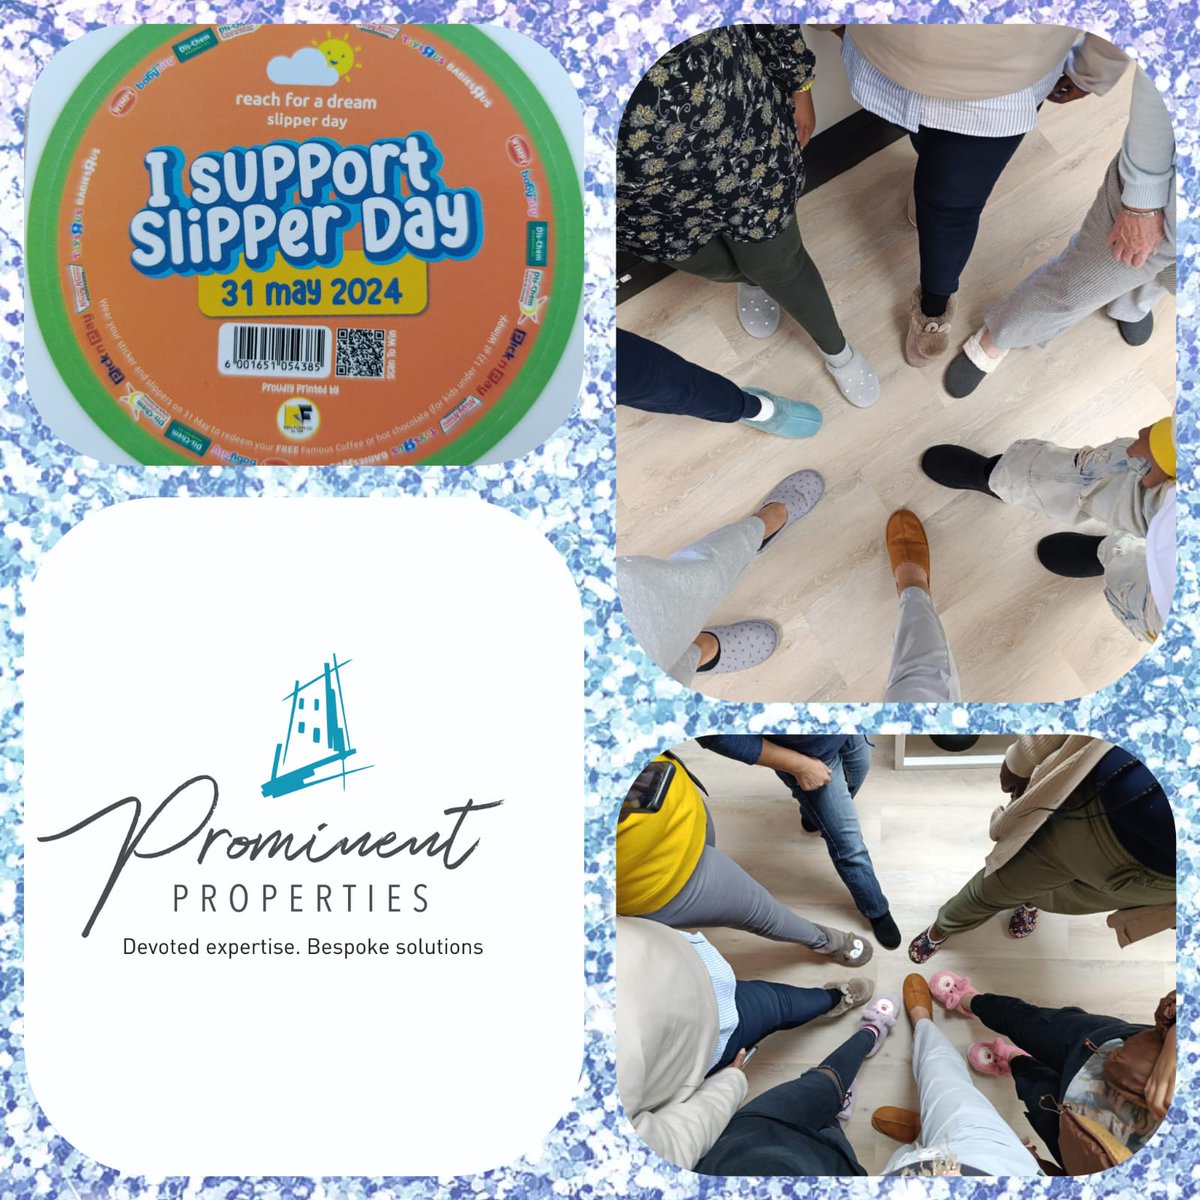 The Prominent Properties' Team Showed up! Thank you for supporting Slipper Day, Reach For A Dream's biggest fundraiser to give Hope to Children with Life-threatening Illnesses #slipperday2024 #stepintomyslippers #PSCC